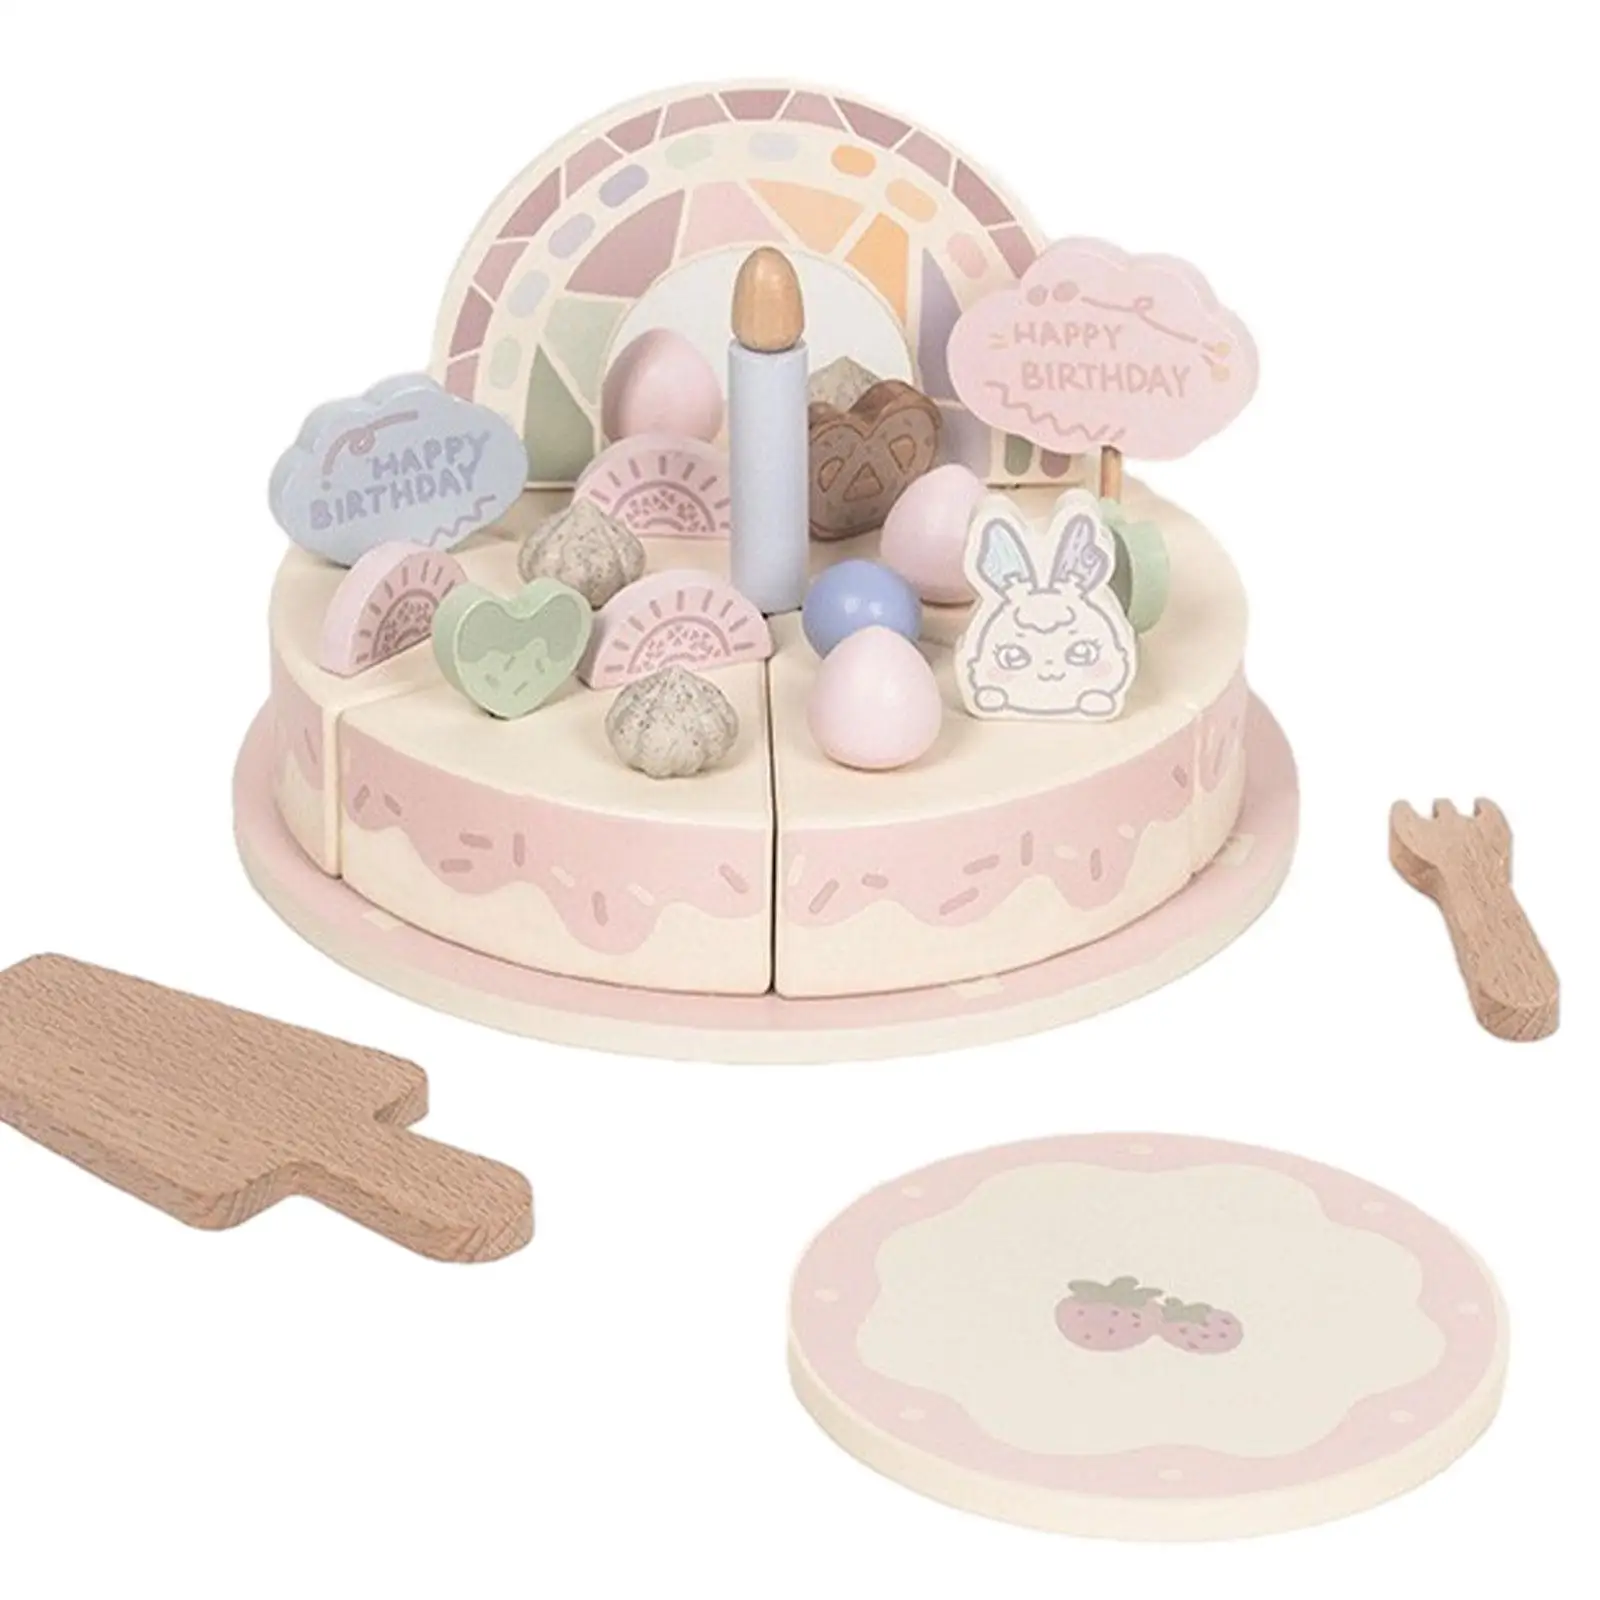 Wooden Birthday Party Cream Cake Play Food Set DIY Pretend Play with Candles Birthday Cake Toy Food Play Set for Girls Boys Kids